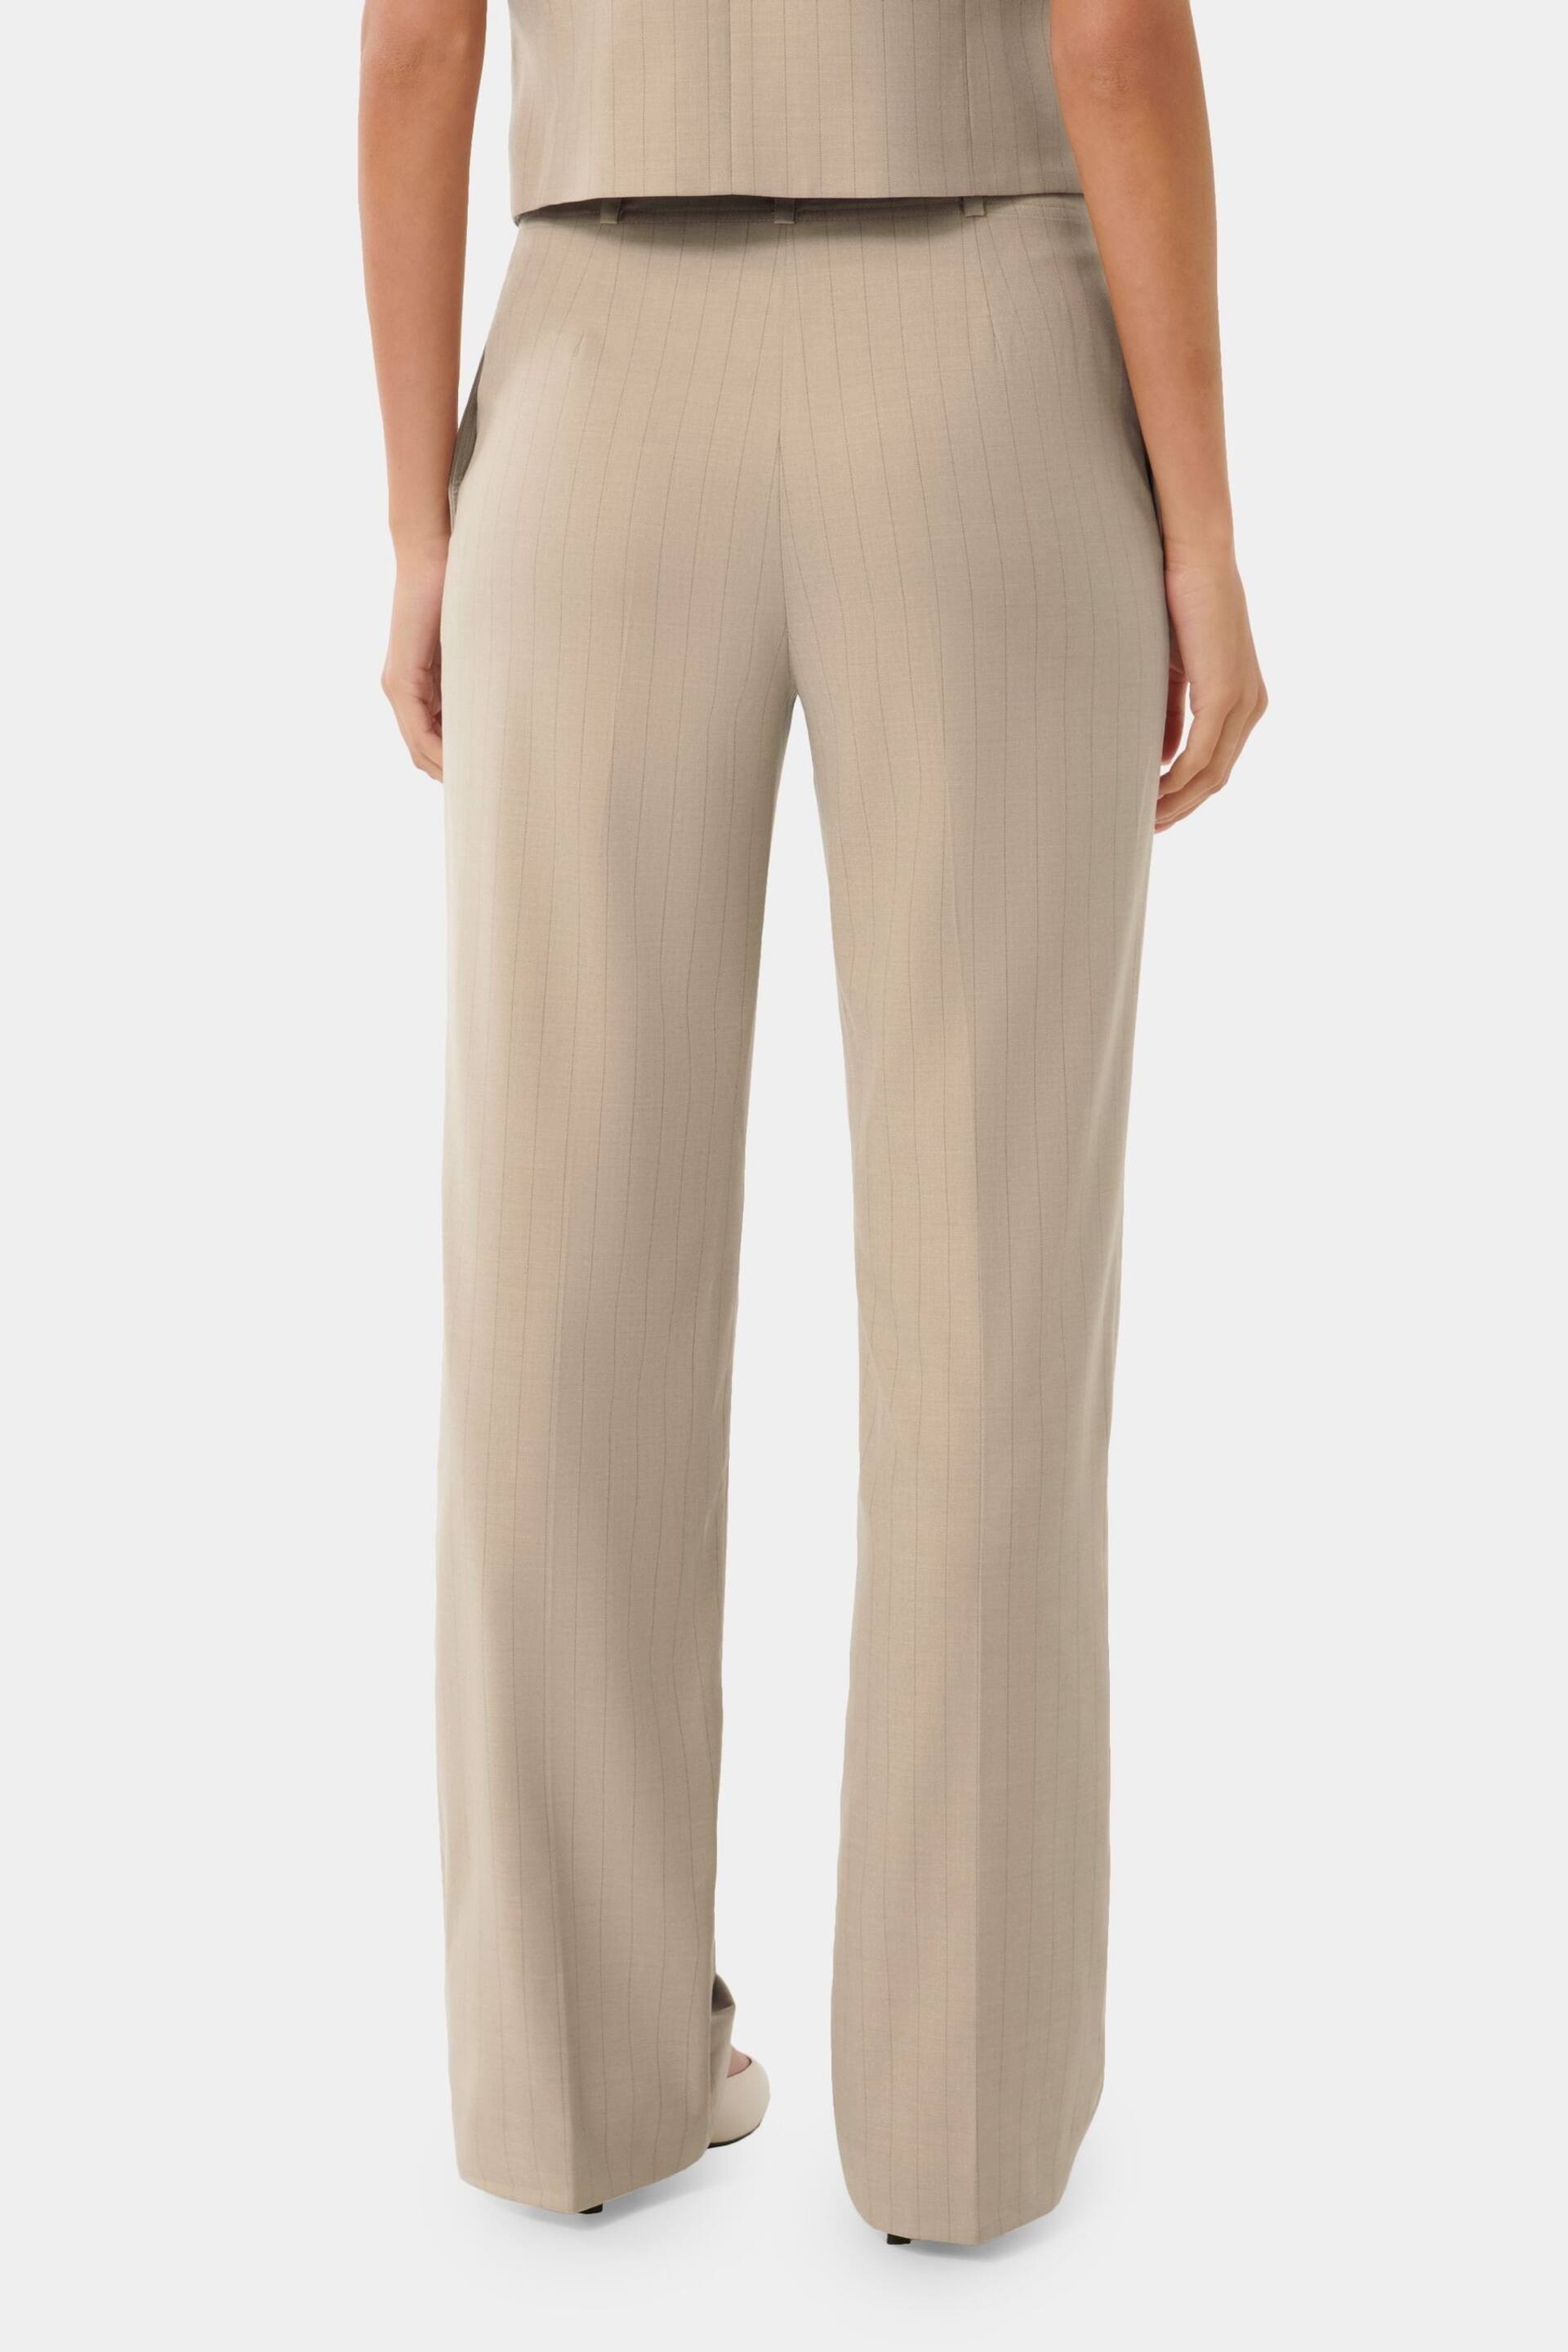 Forever New Natural Emmie Straight Leg Trousers - Image 4 of 5